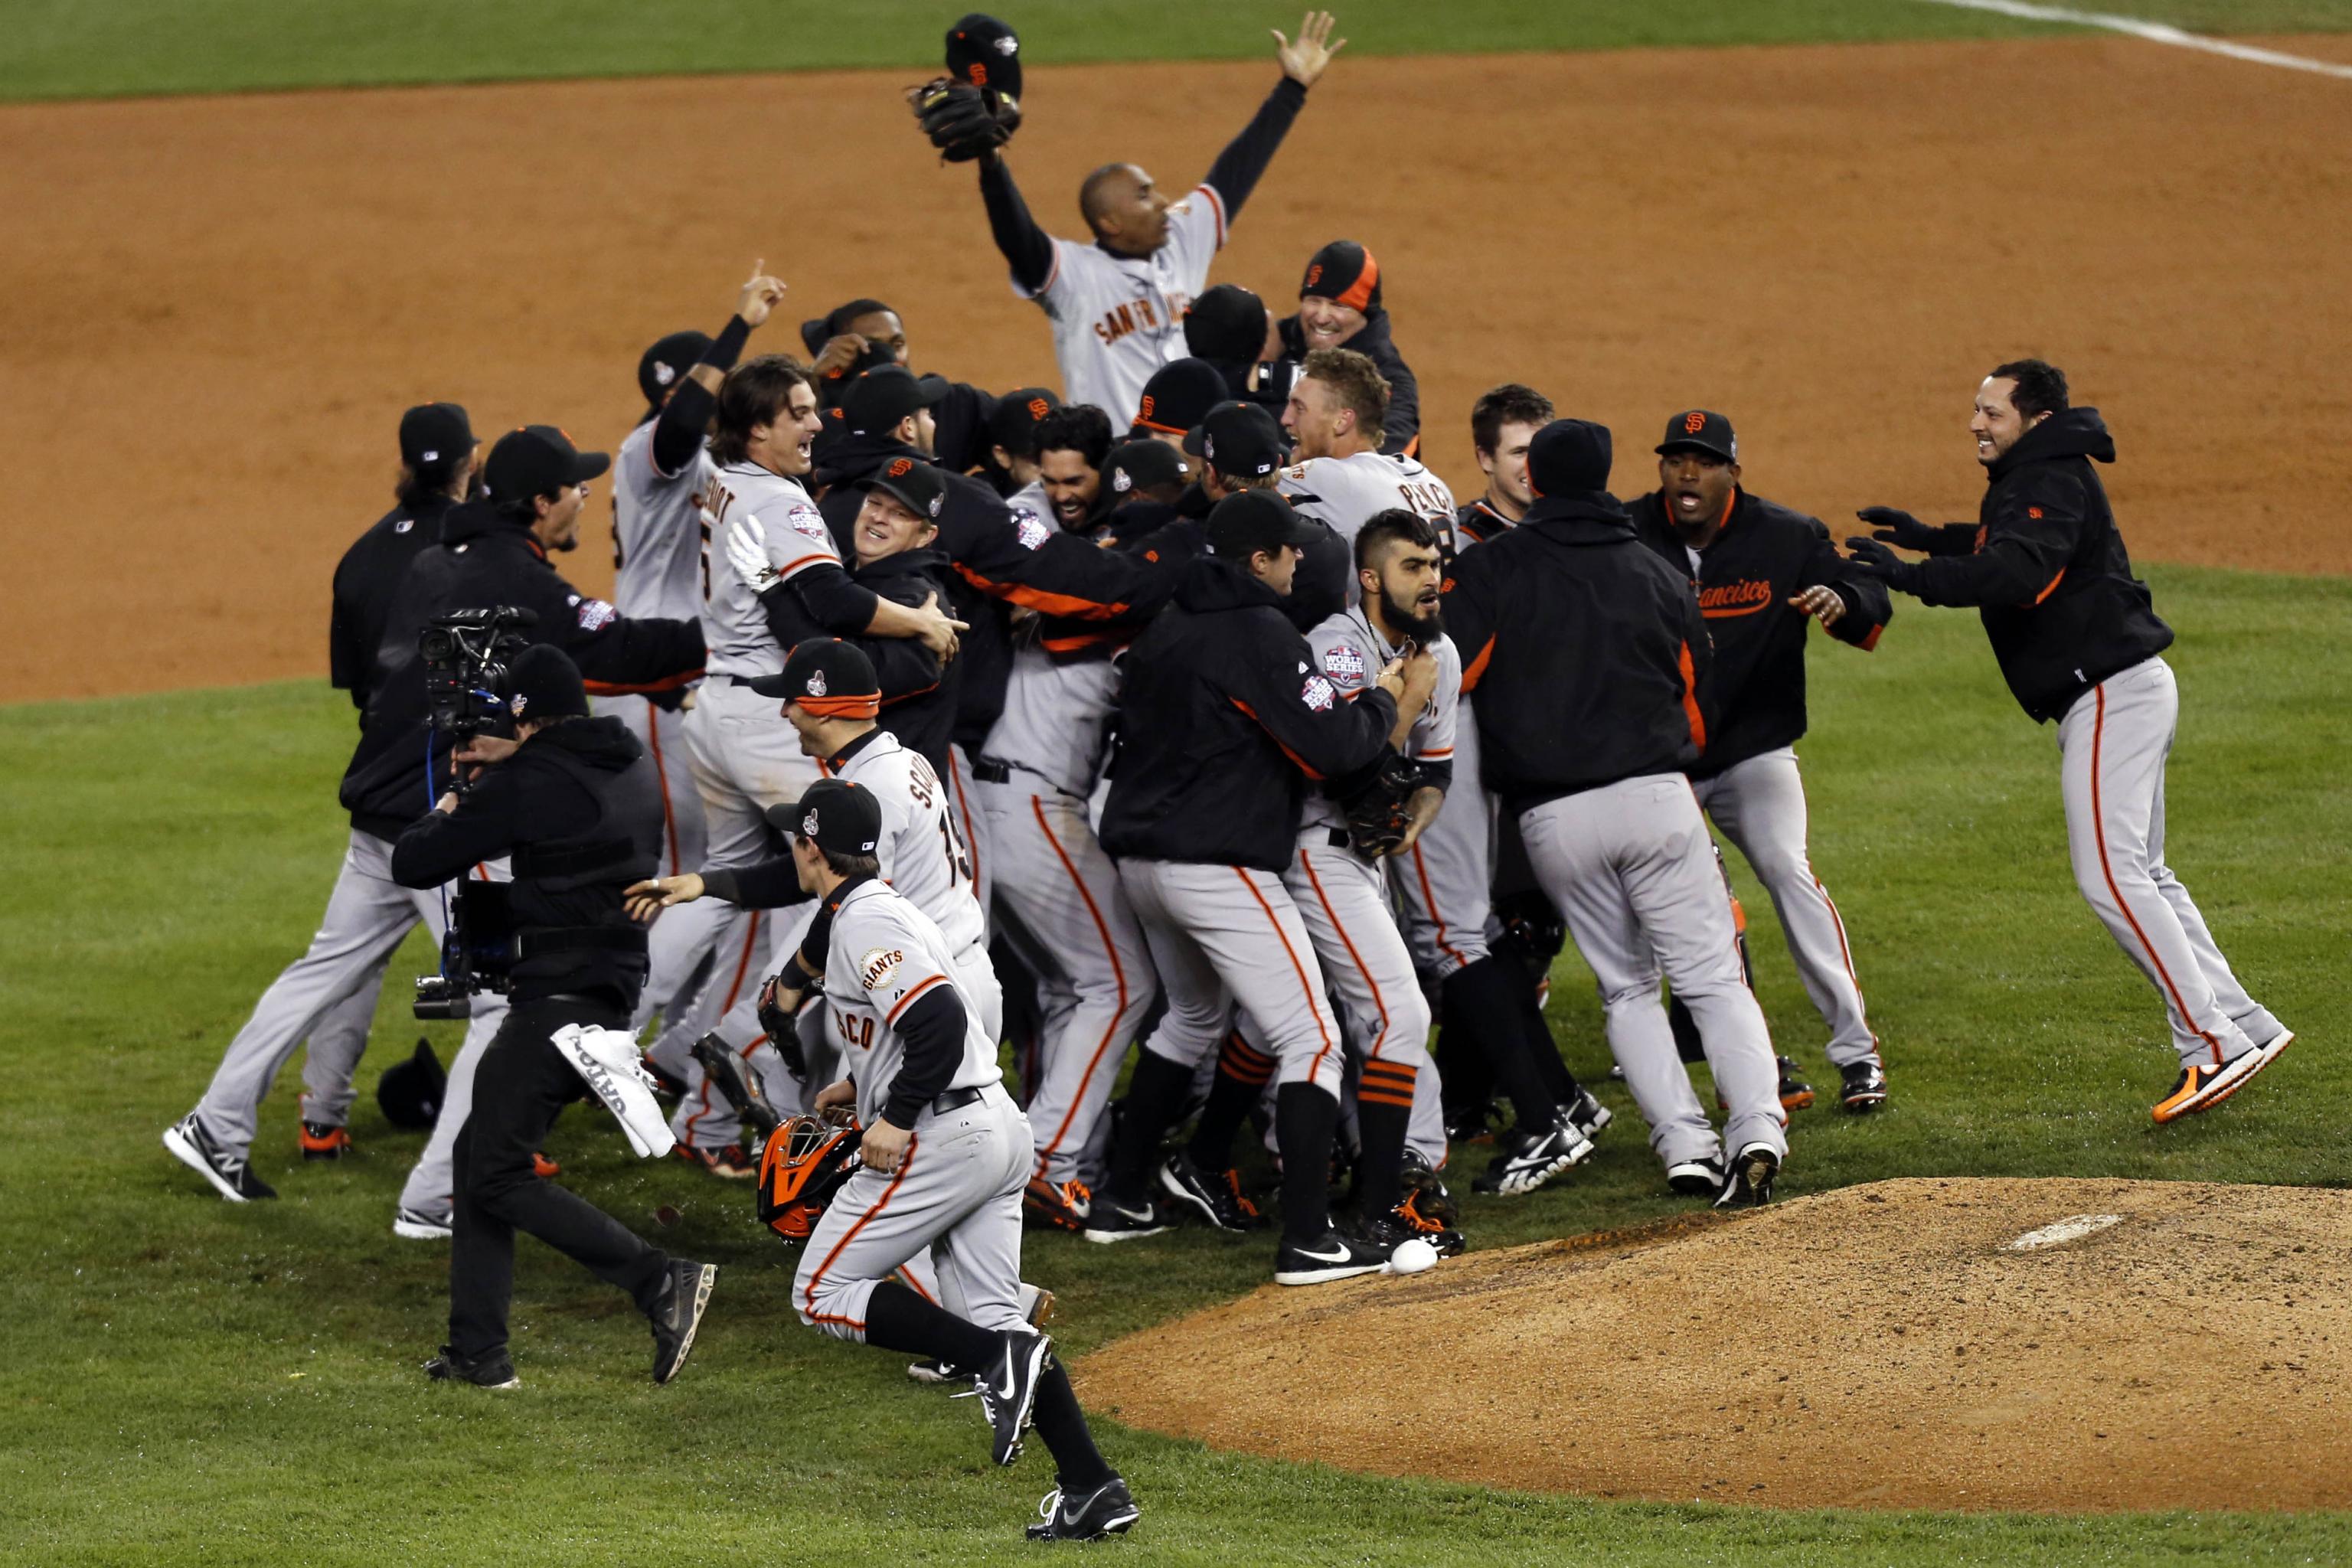 Marco Scutaro, Giants answer back to even NLCS